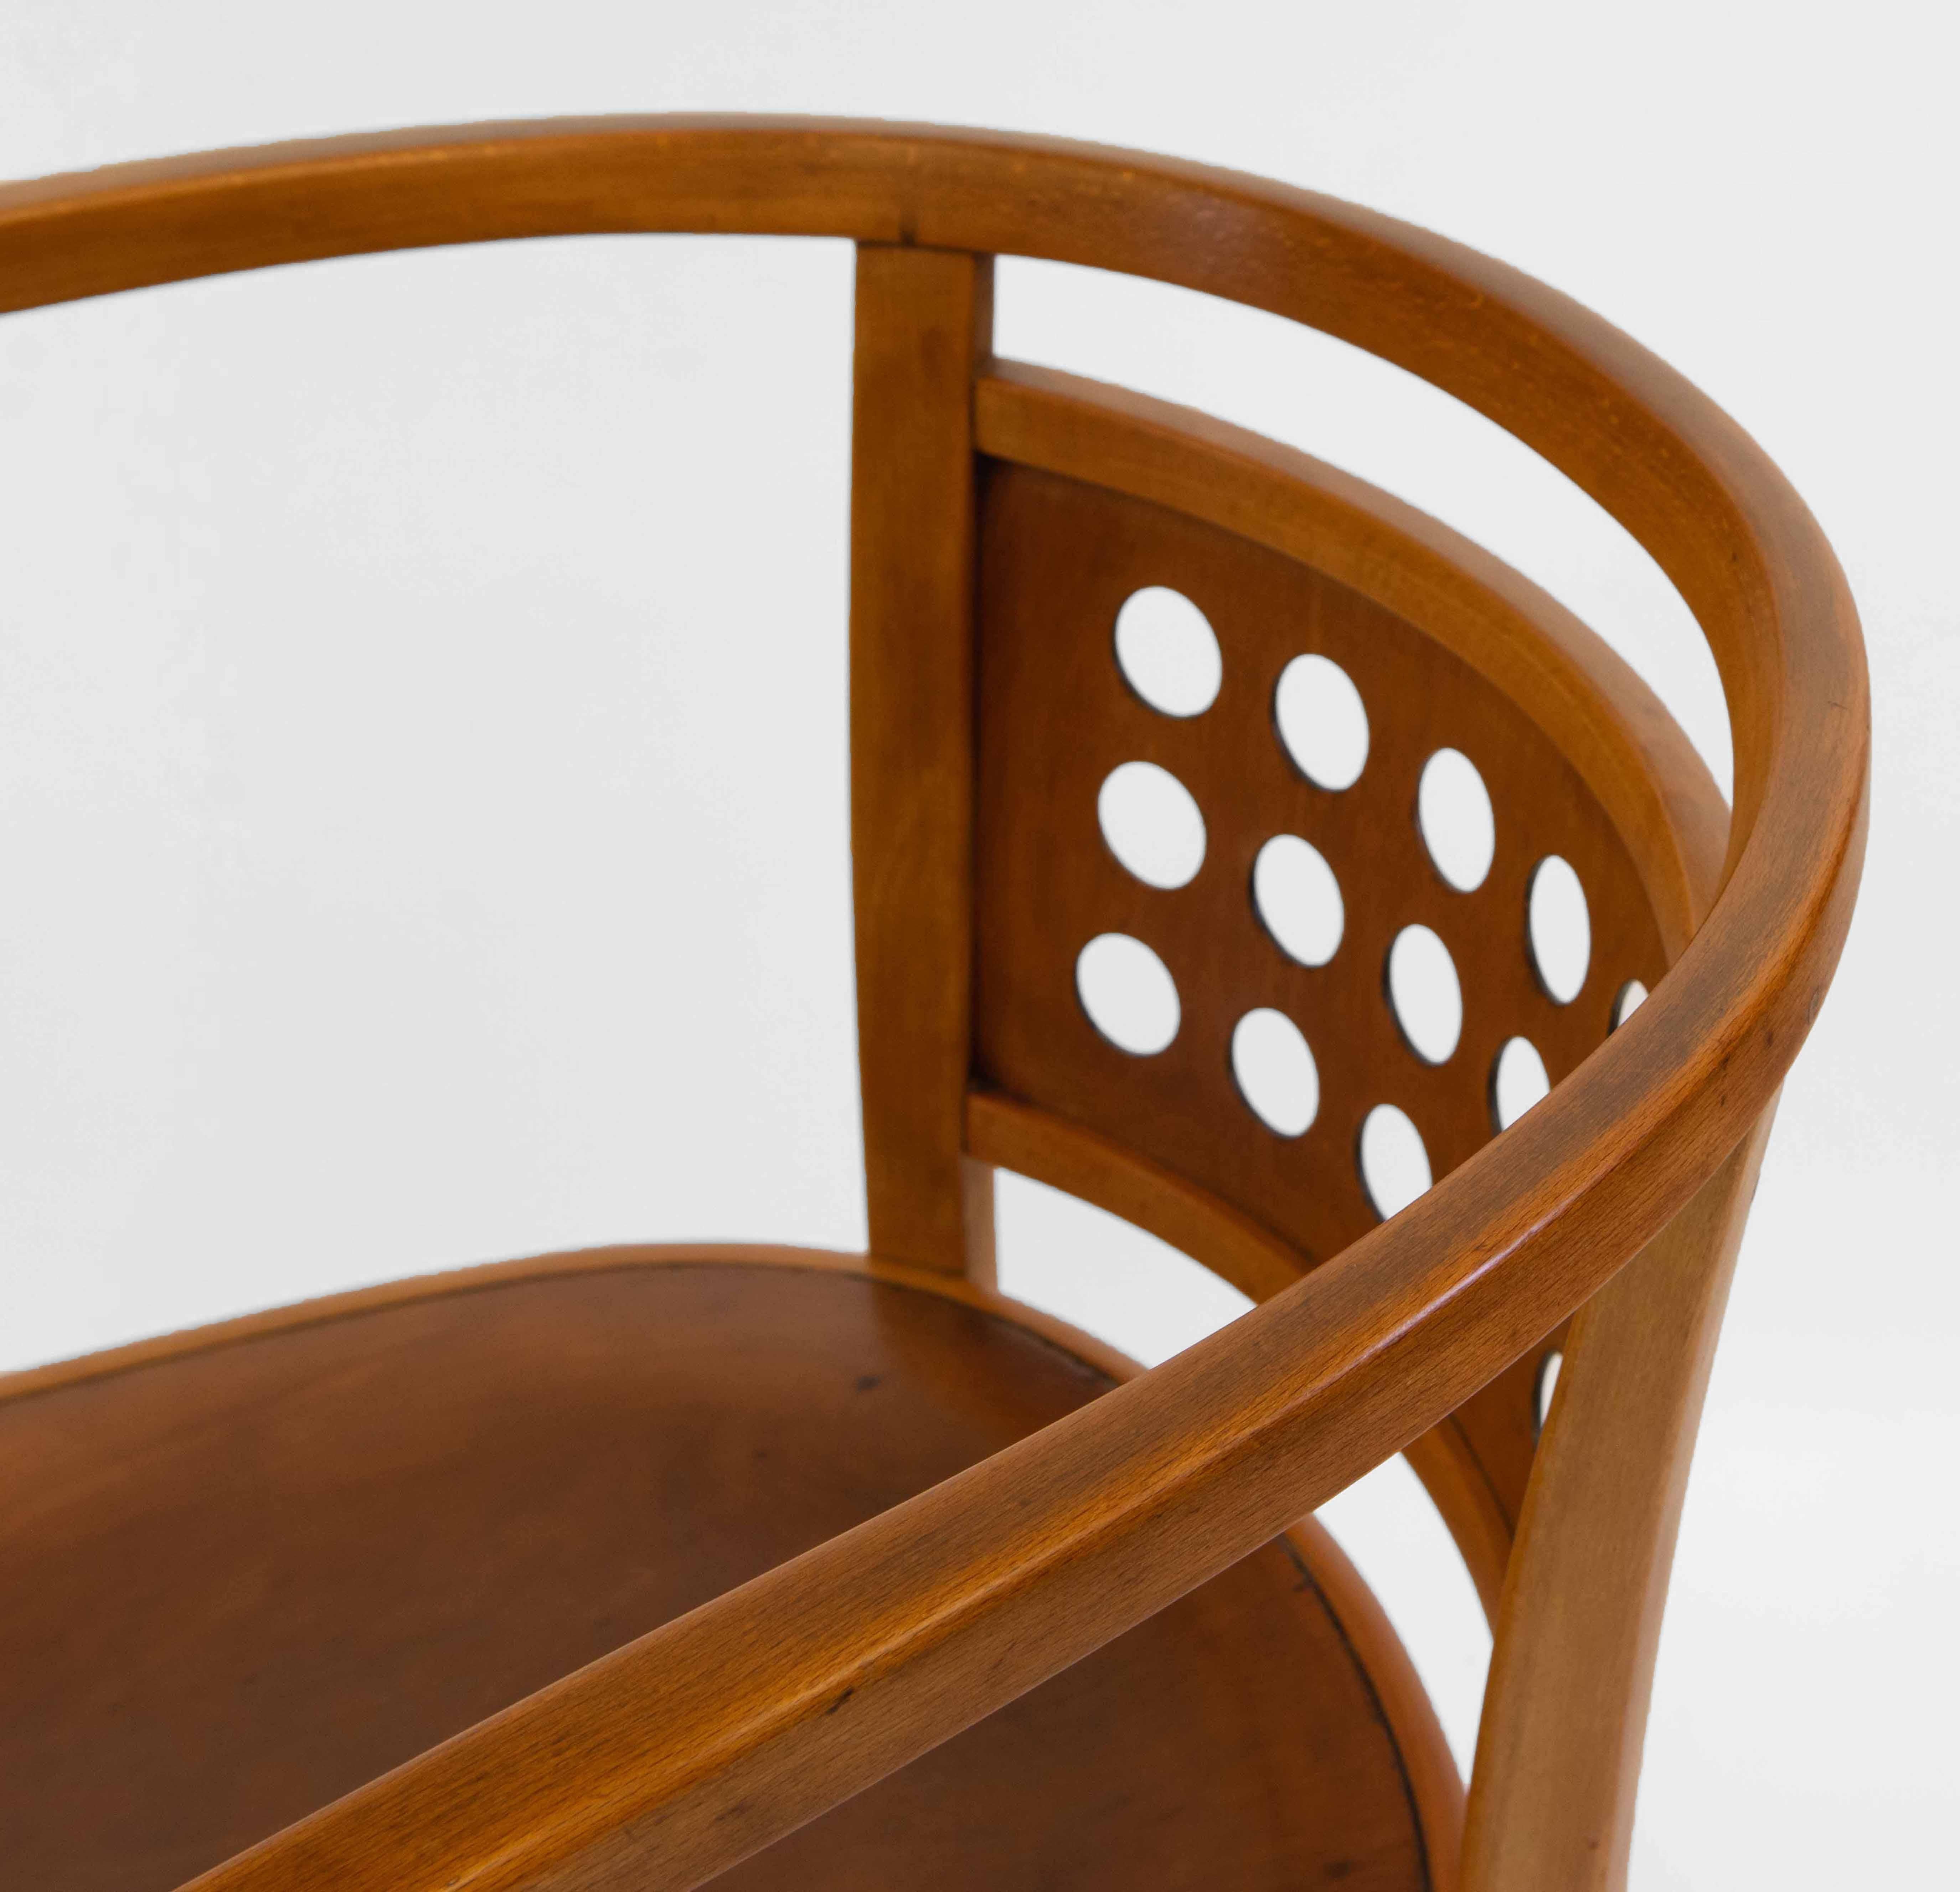 Vienna Secessionist Bentwood Armchair Designed By Otto Wagner 1